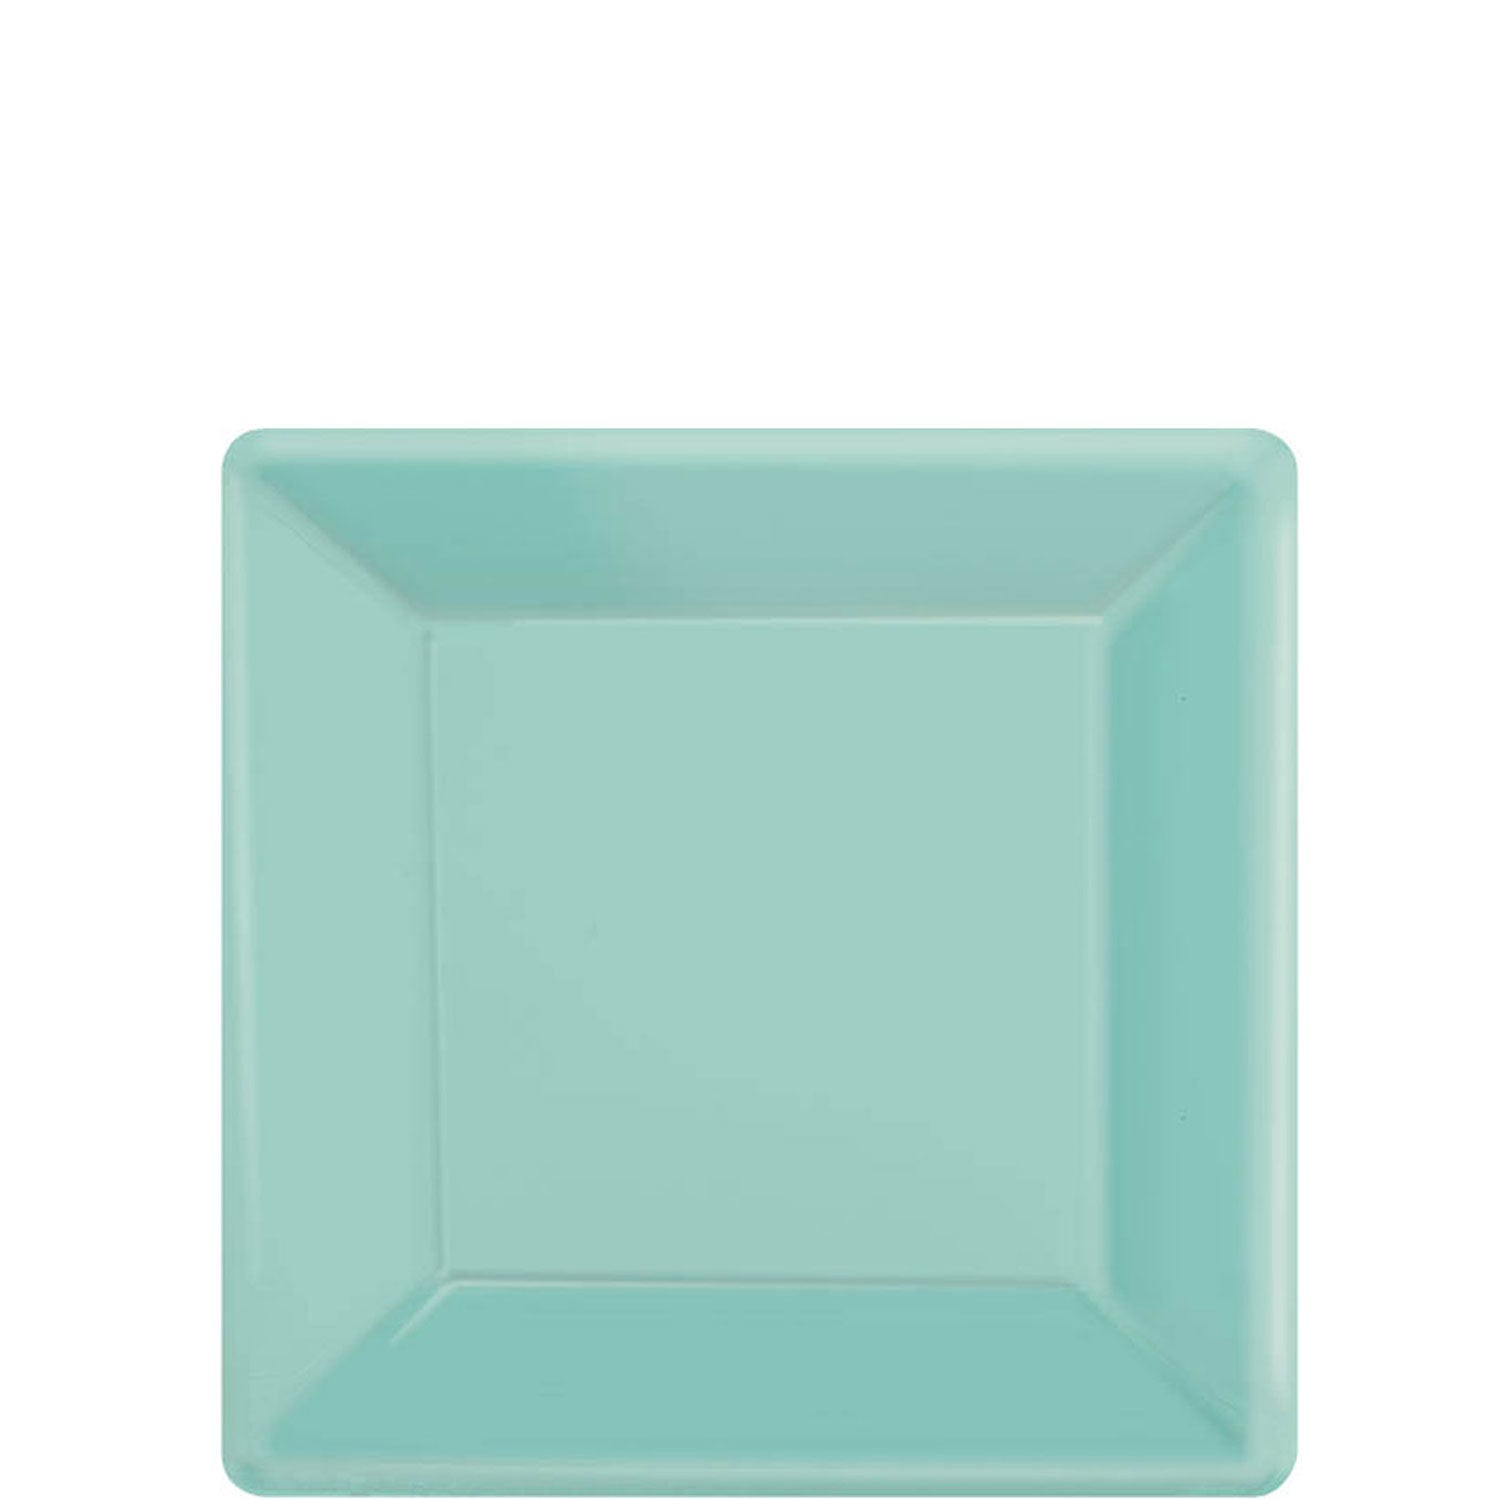 Robins Egg Blue Square Paper Plates 7in, 20pcs Solid Tableware - Party Centre